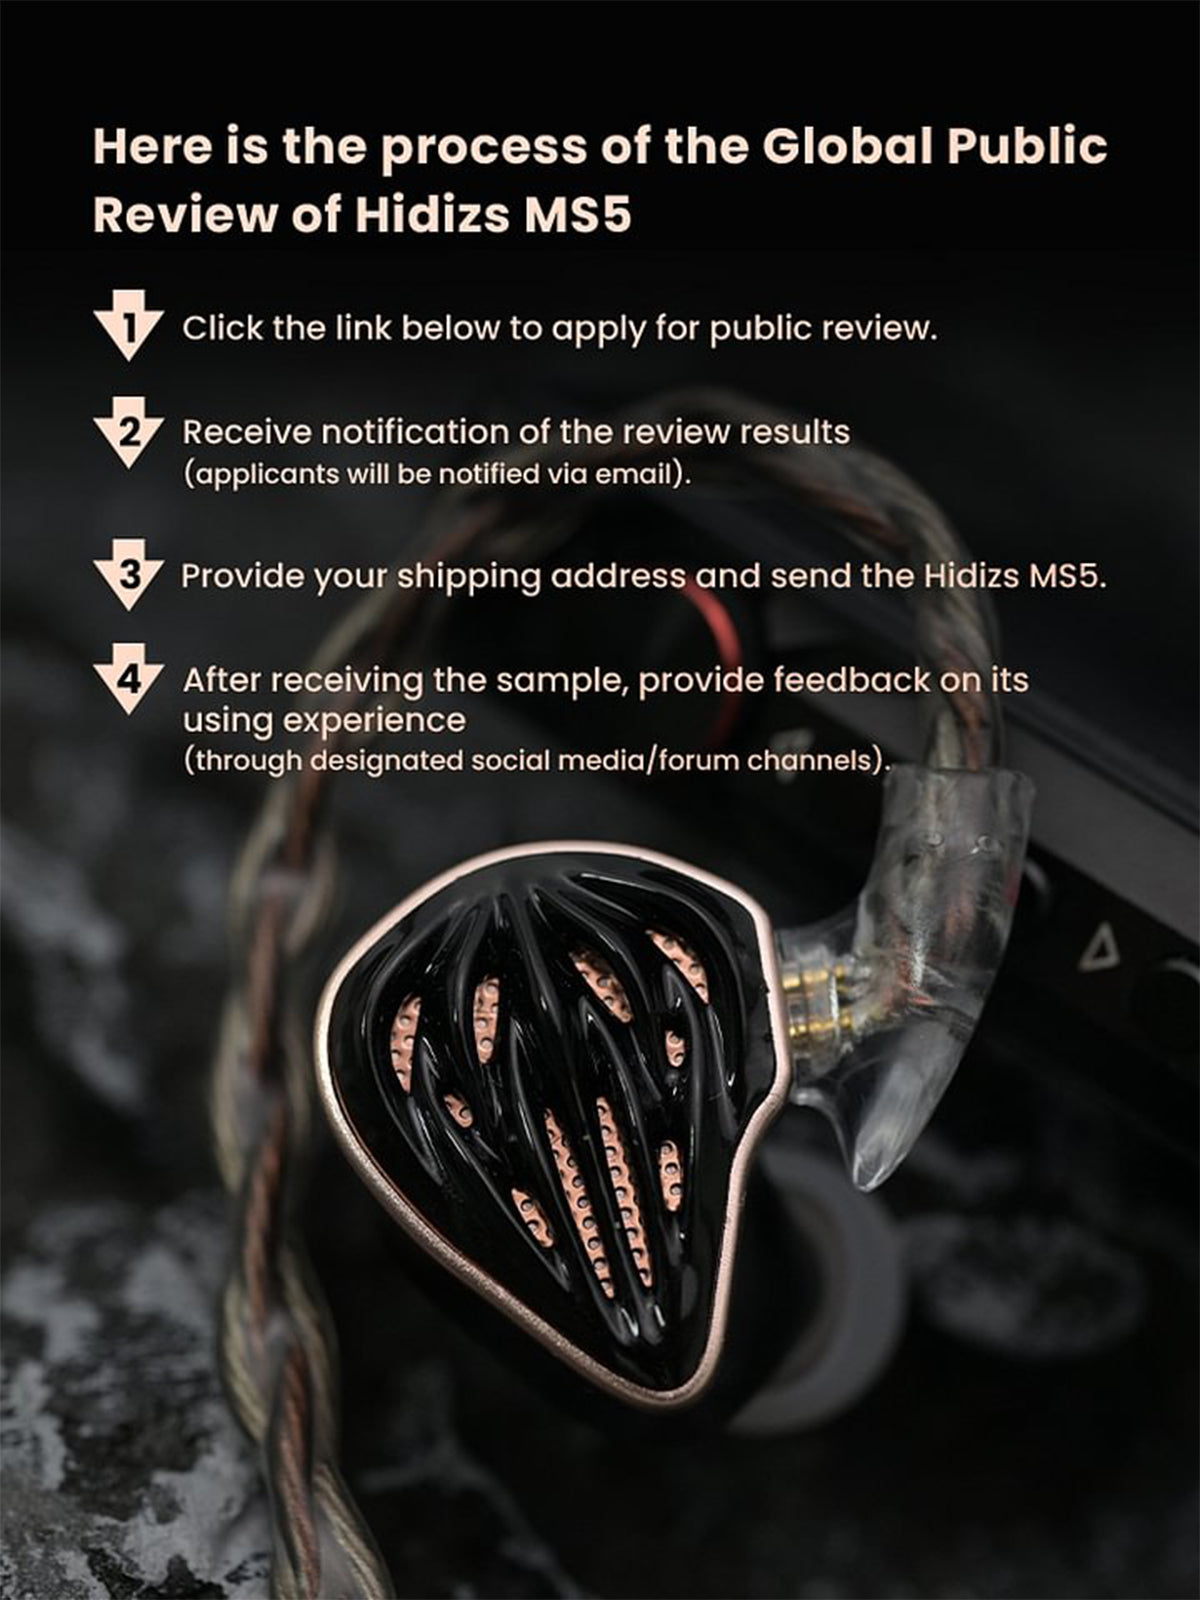 HIDIZS-JOIN_THE_FREE_GLOBAL_PUBLIC_REVIEW_OF_HIDIZS_MS5-M-23031504